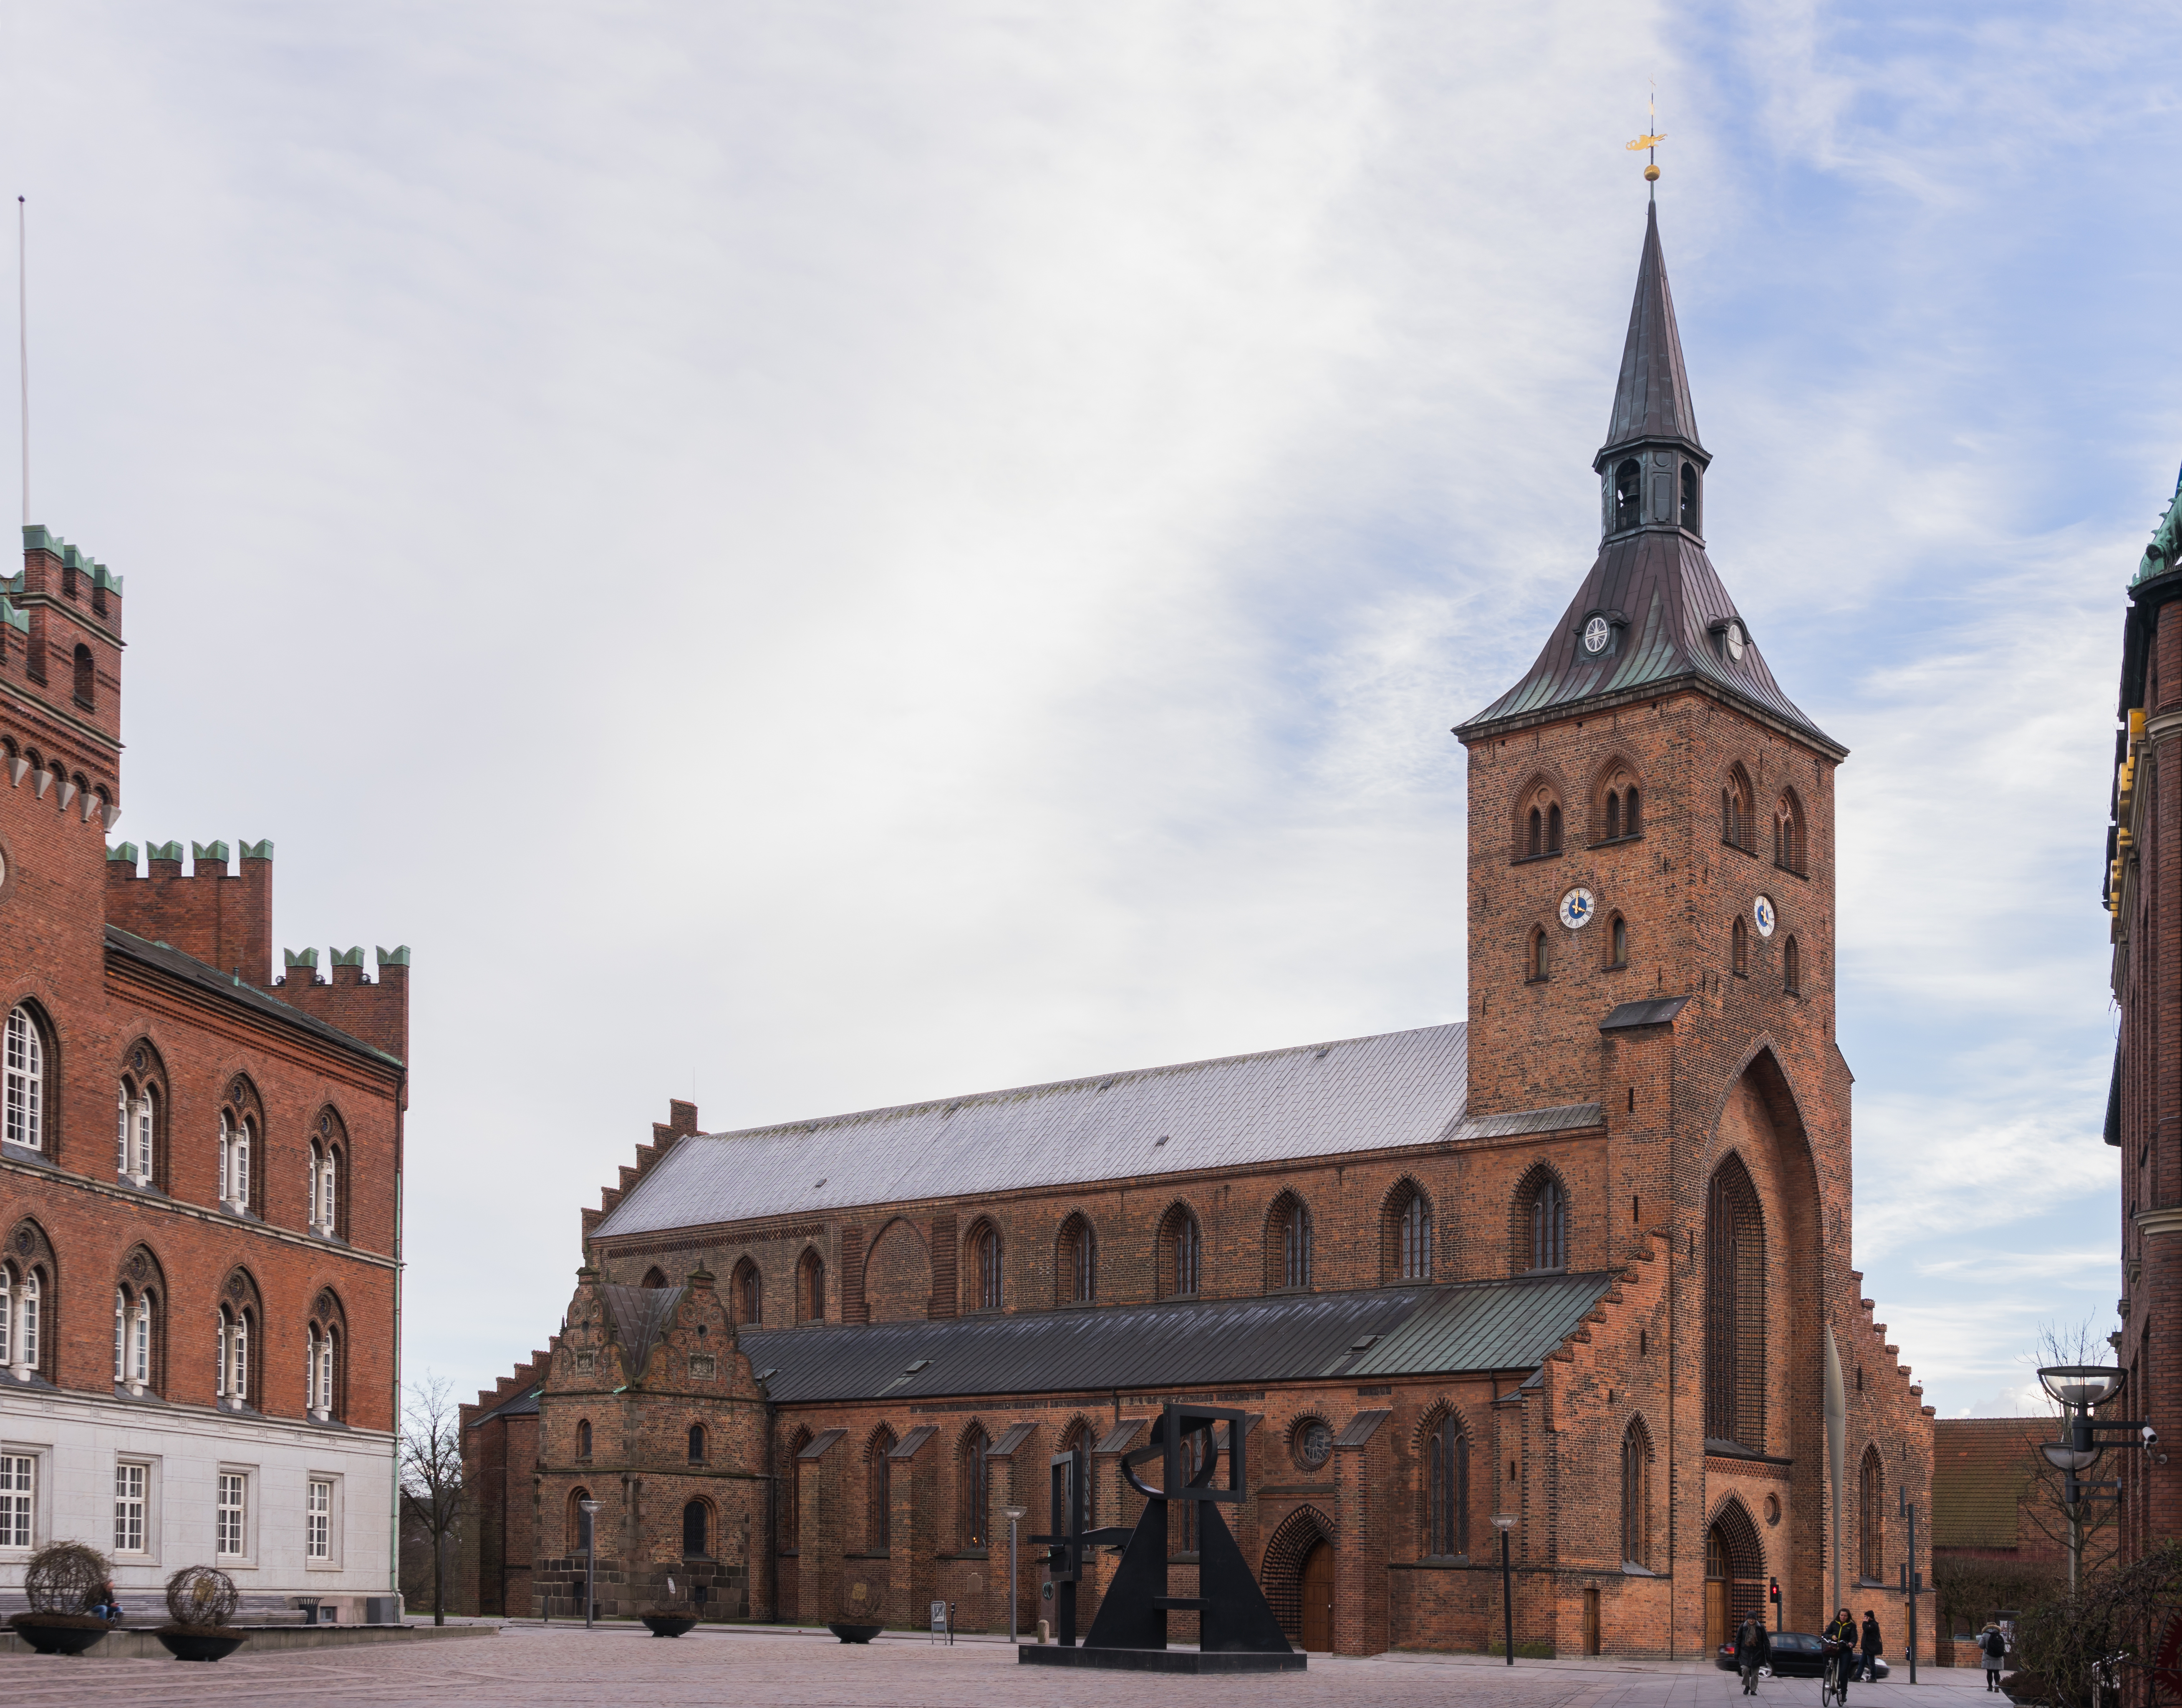 File:Saint Knud's cathedral Odense Denmark.jpg - Wikimedia Commons